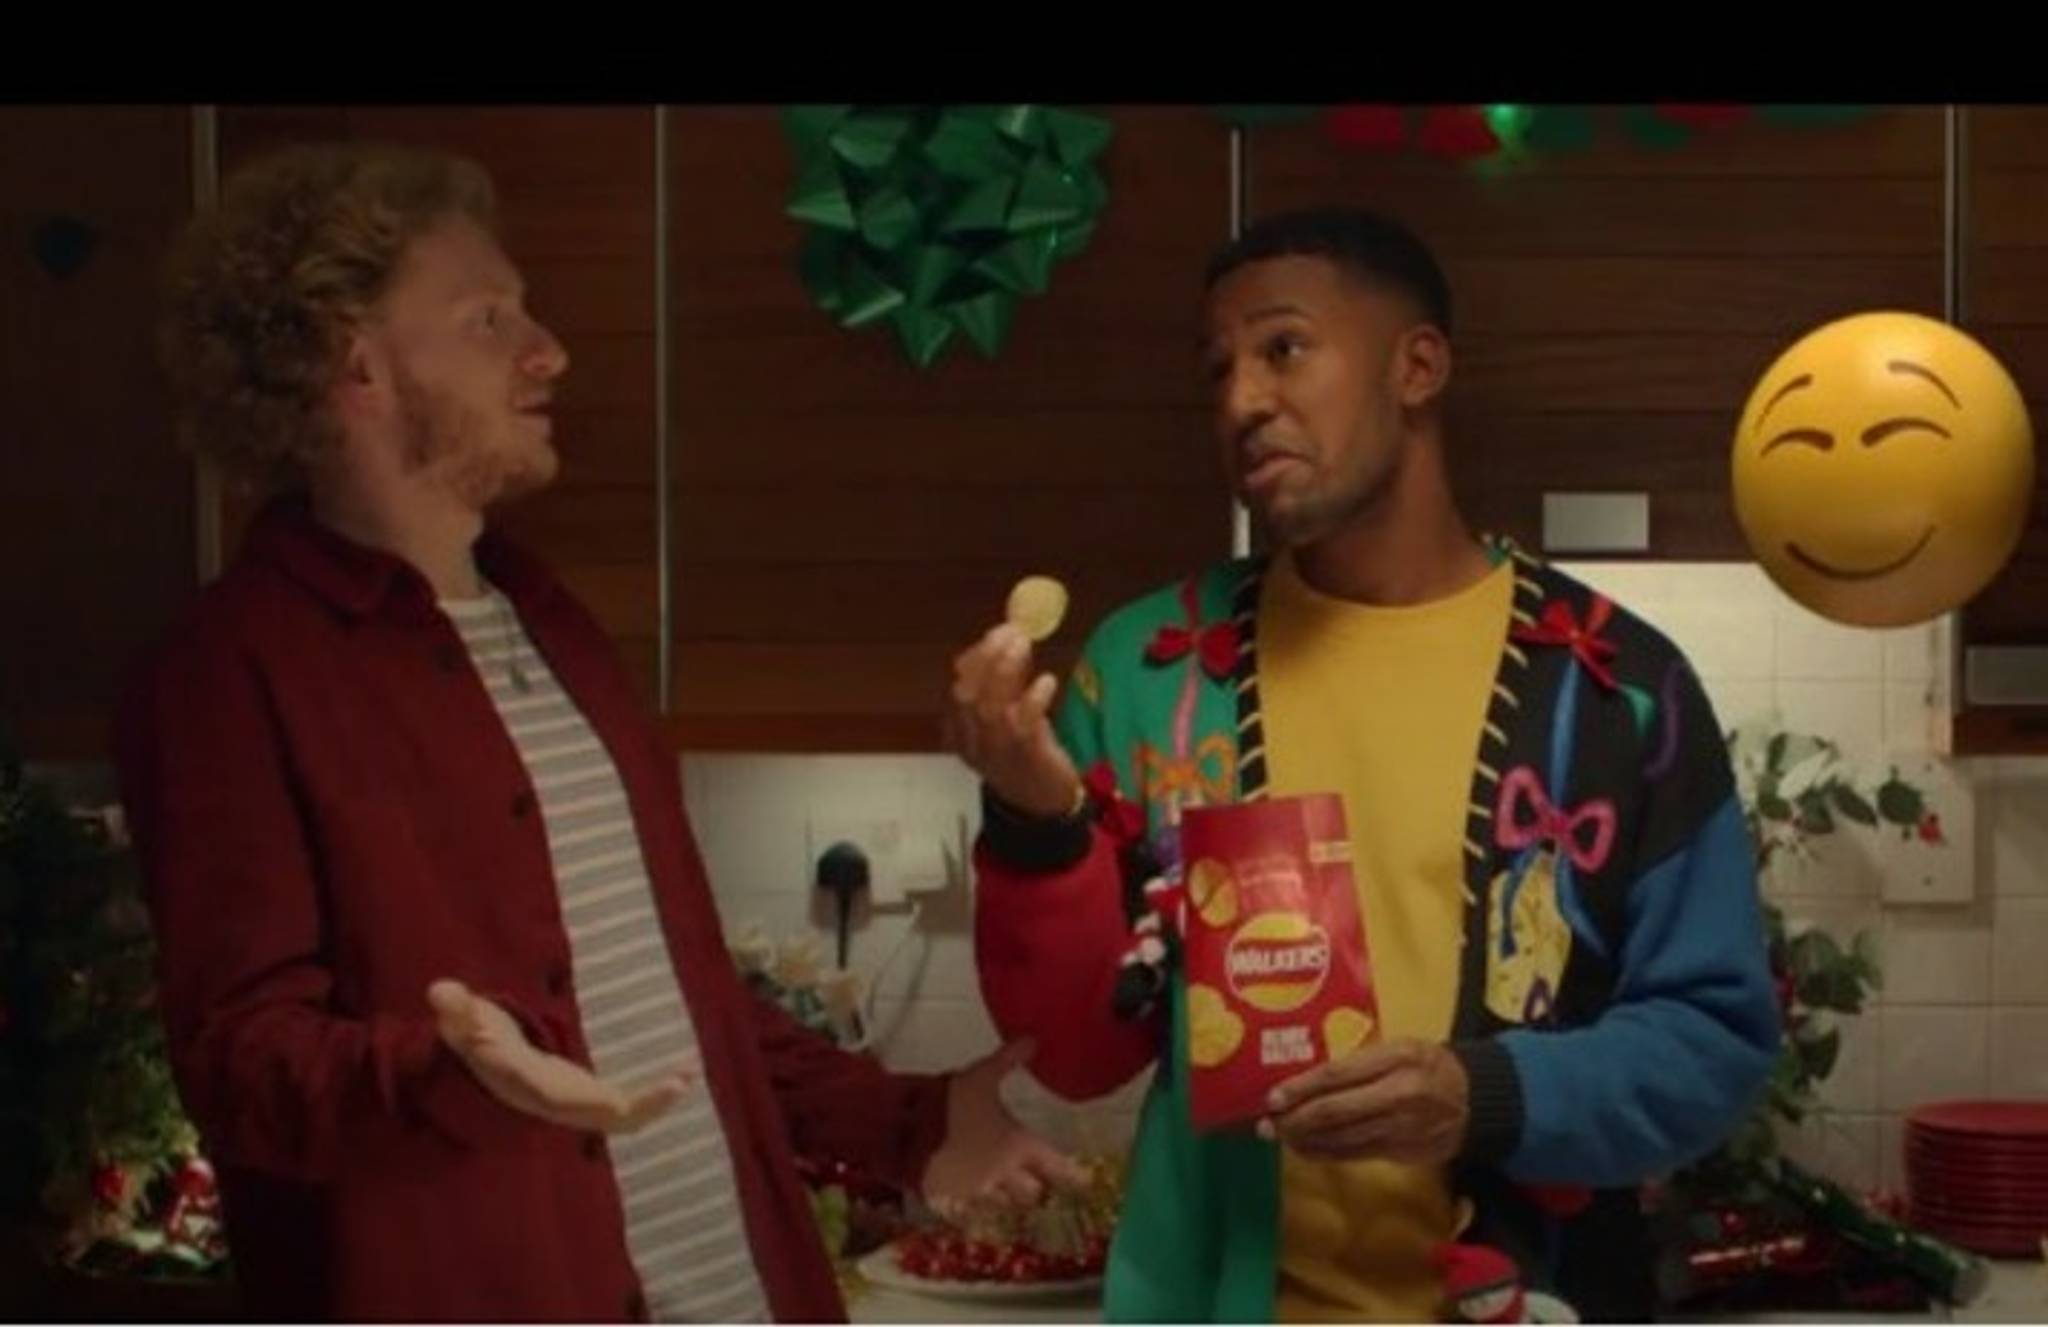 Walkers tackles festive anxiety with Christmas ad